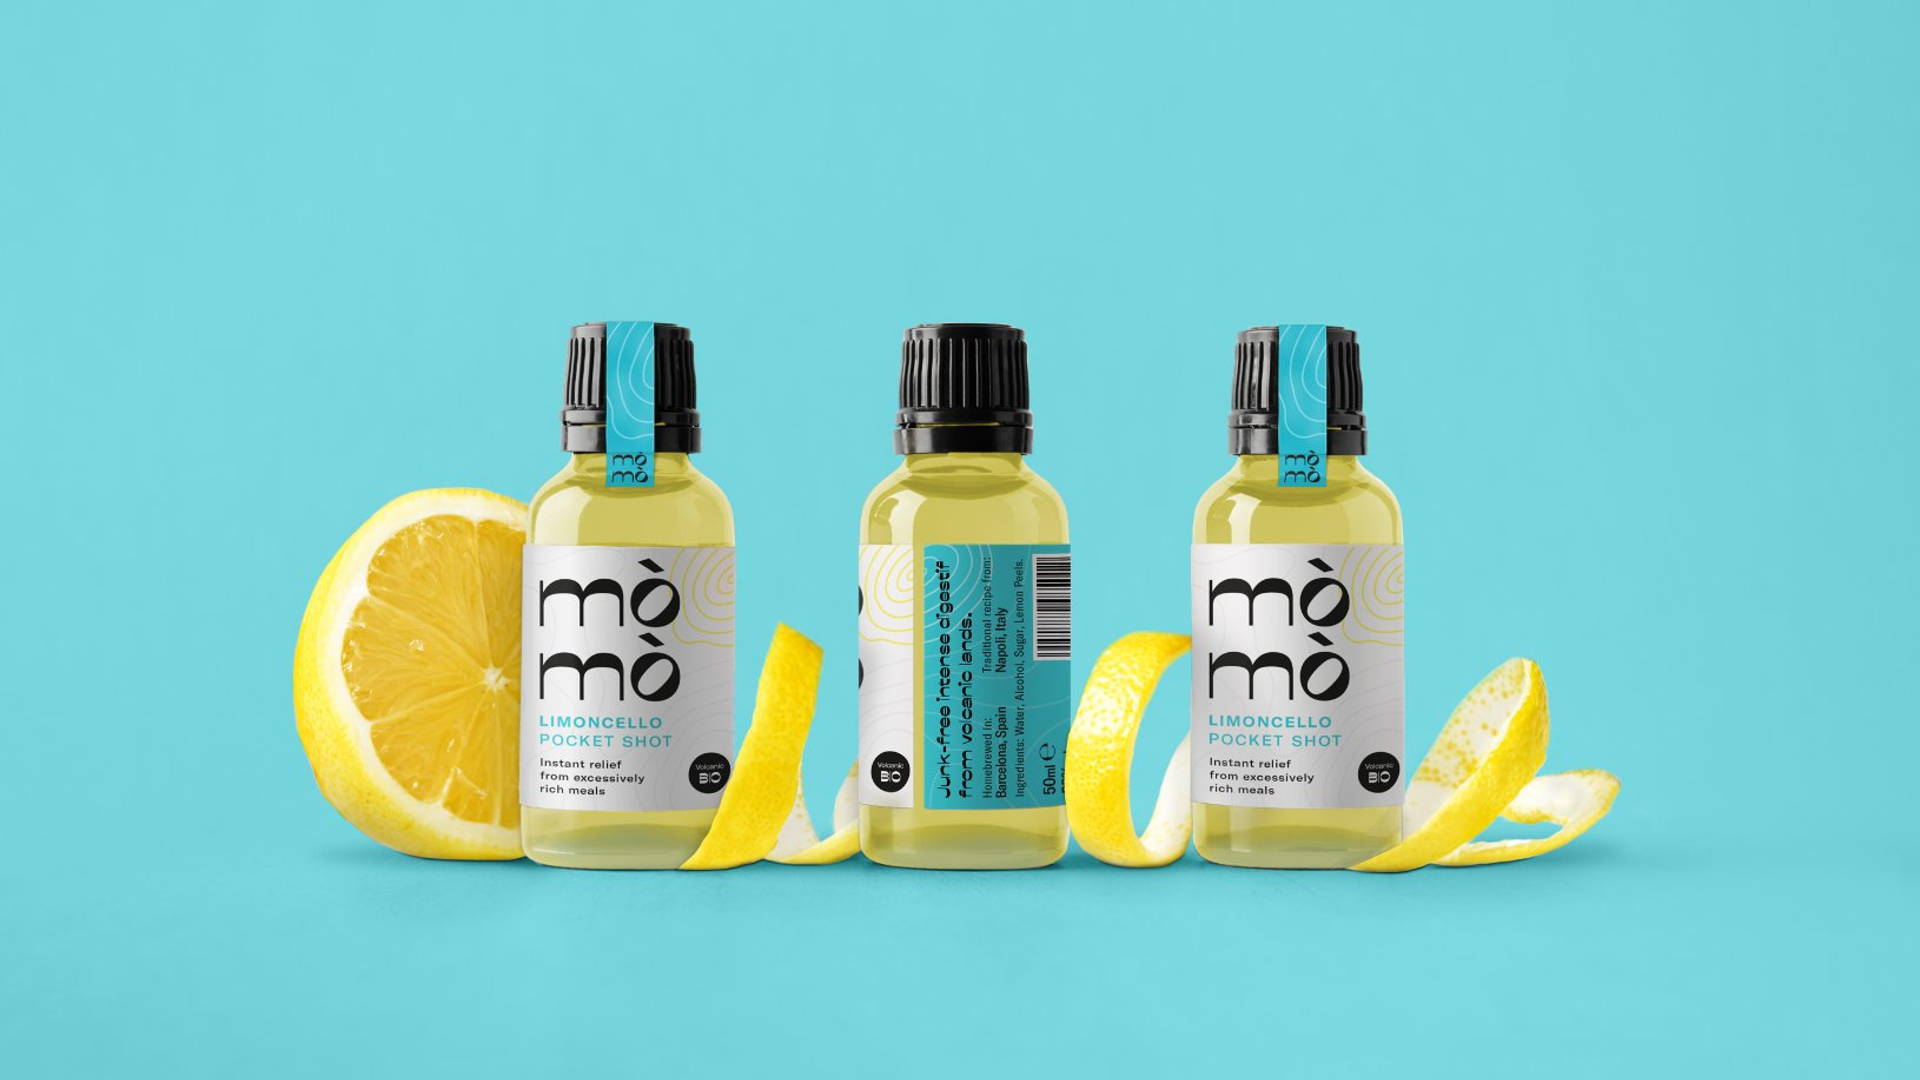 Featured image for Mòmò Limoncello Pocket Shots Are Fresh, Kinetic, and Fun